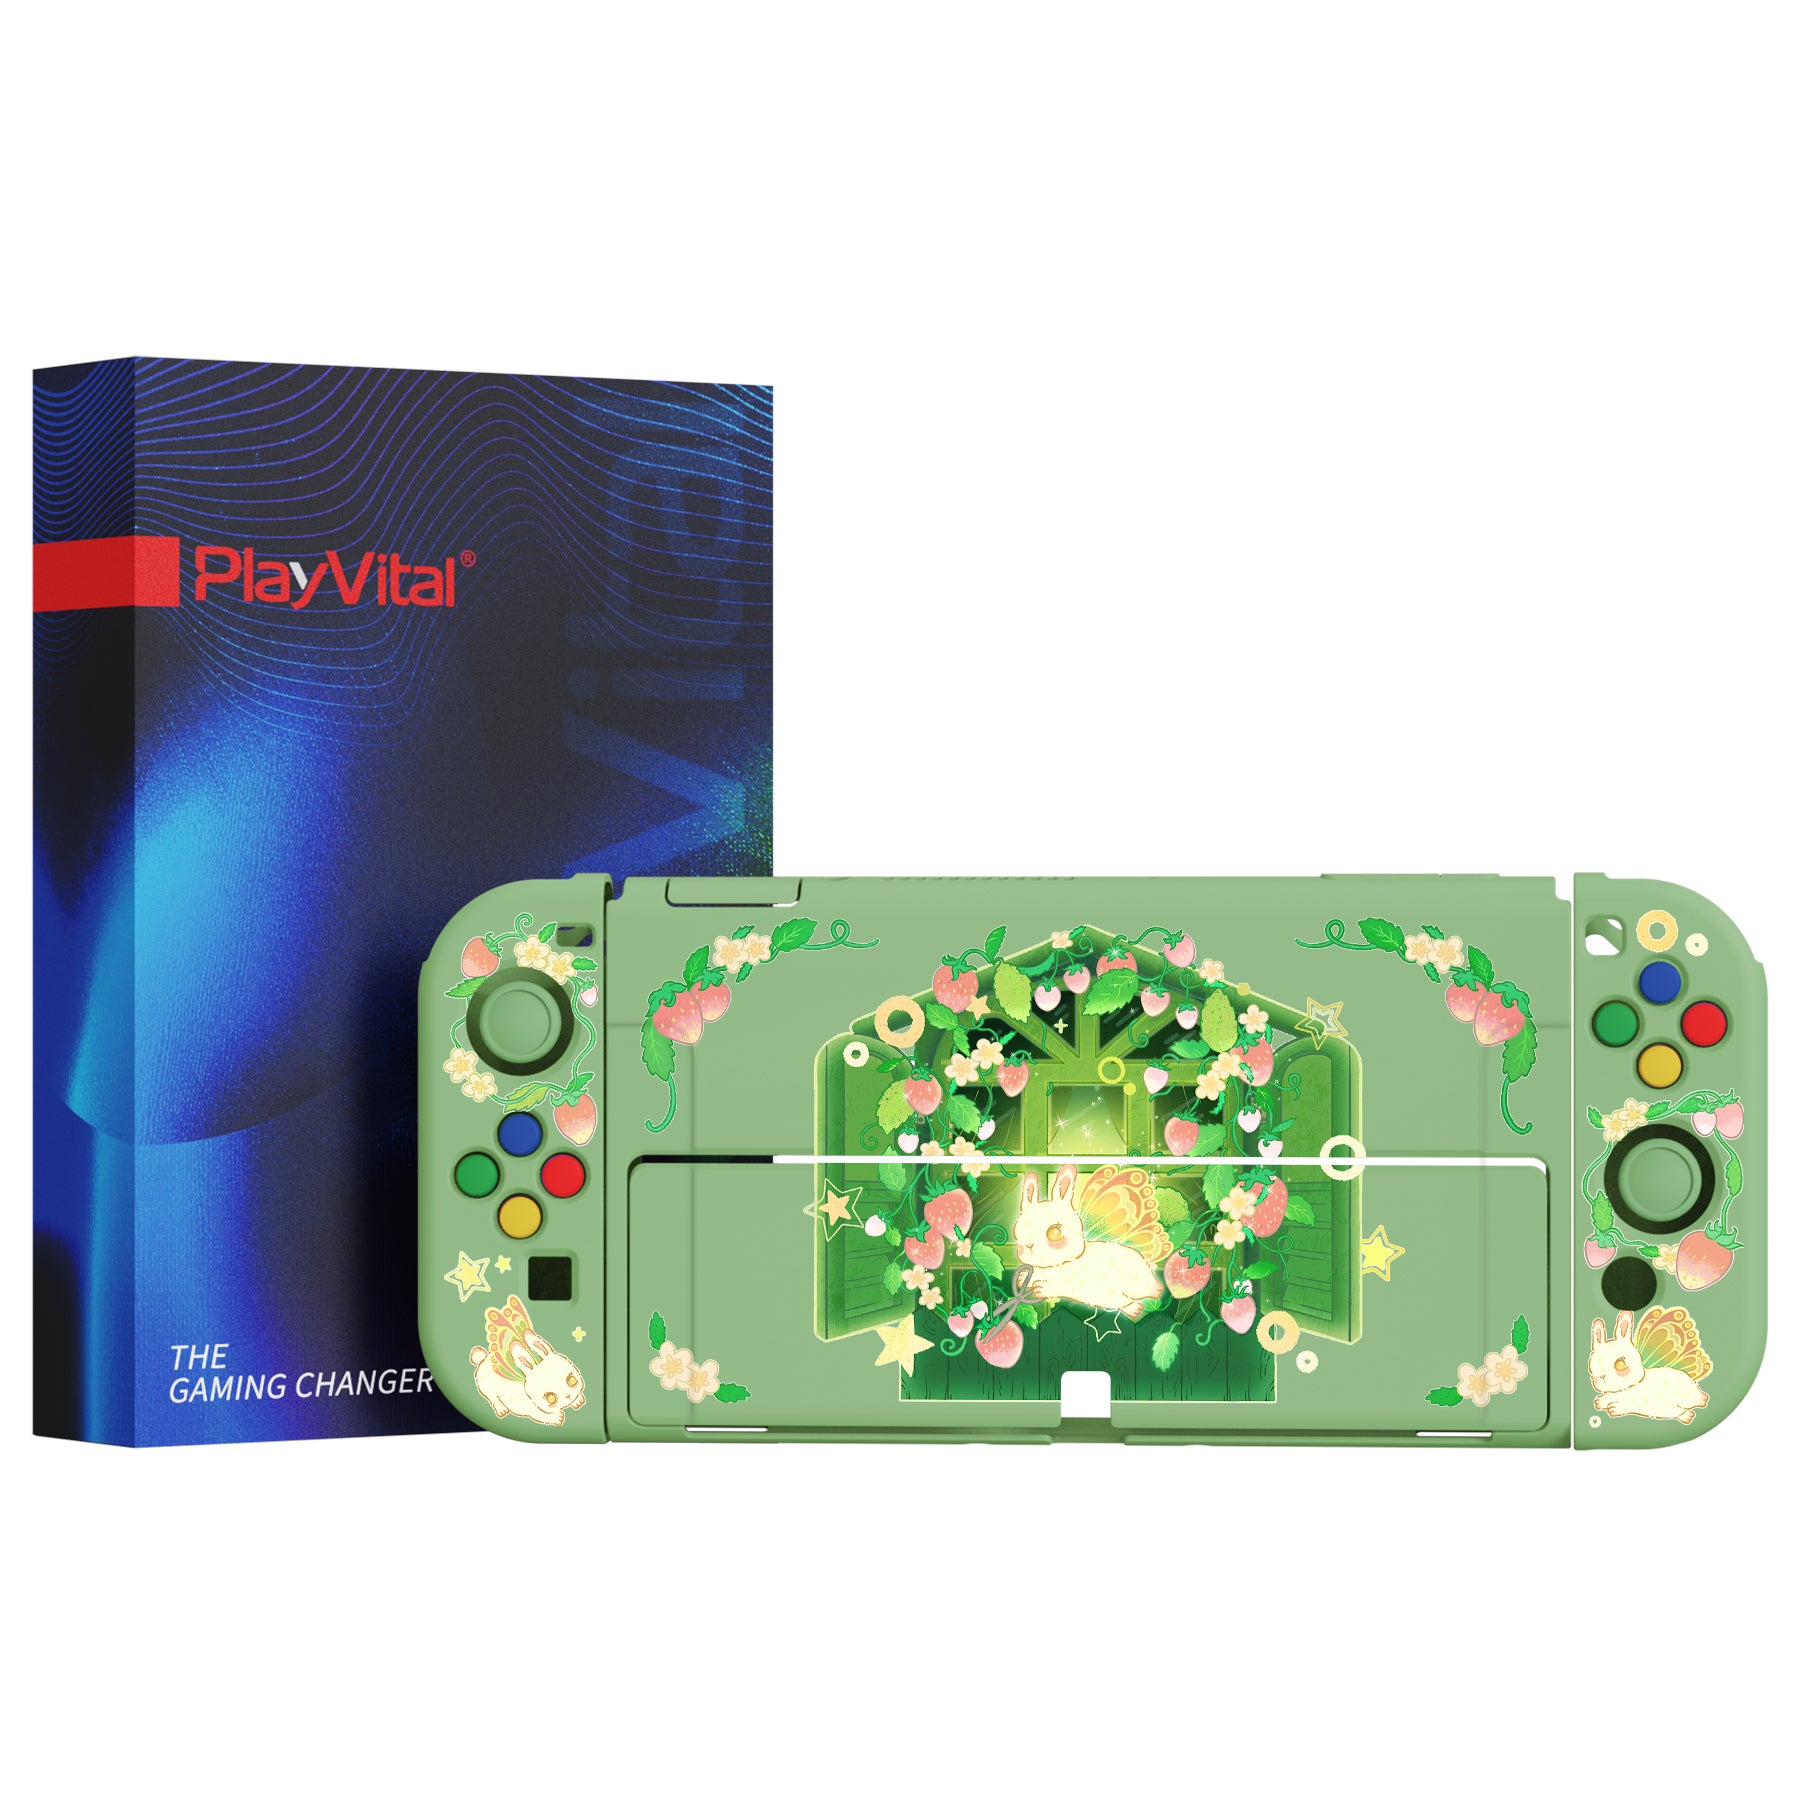 PlayVital ZealProtect Soft Protective Case for Switch OLED, Flexible Protector Joycon Grip Cover for Switch OLED with Thumb Grip Caps & ABXY Direction Button Caps - Strawberry Bunny - XSOYV6036 playvital